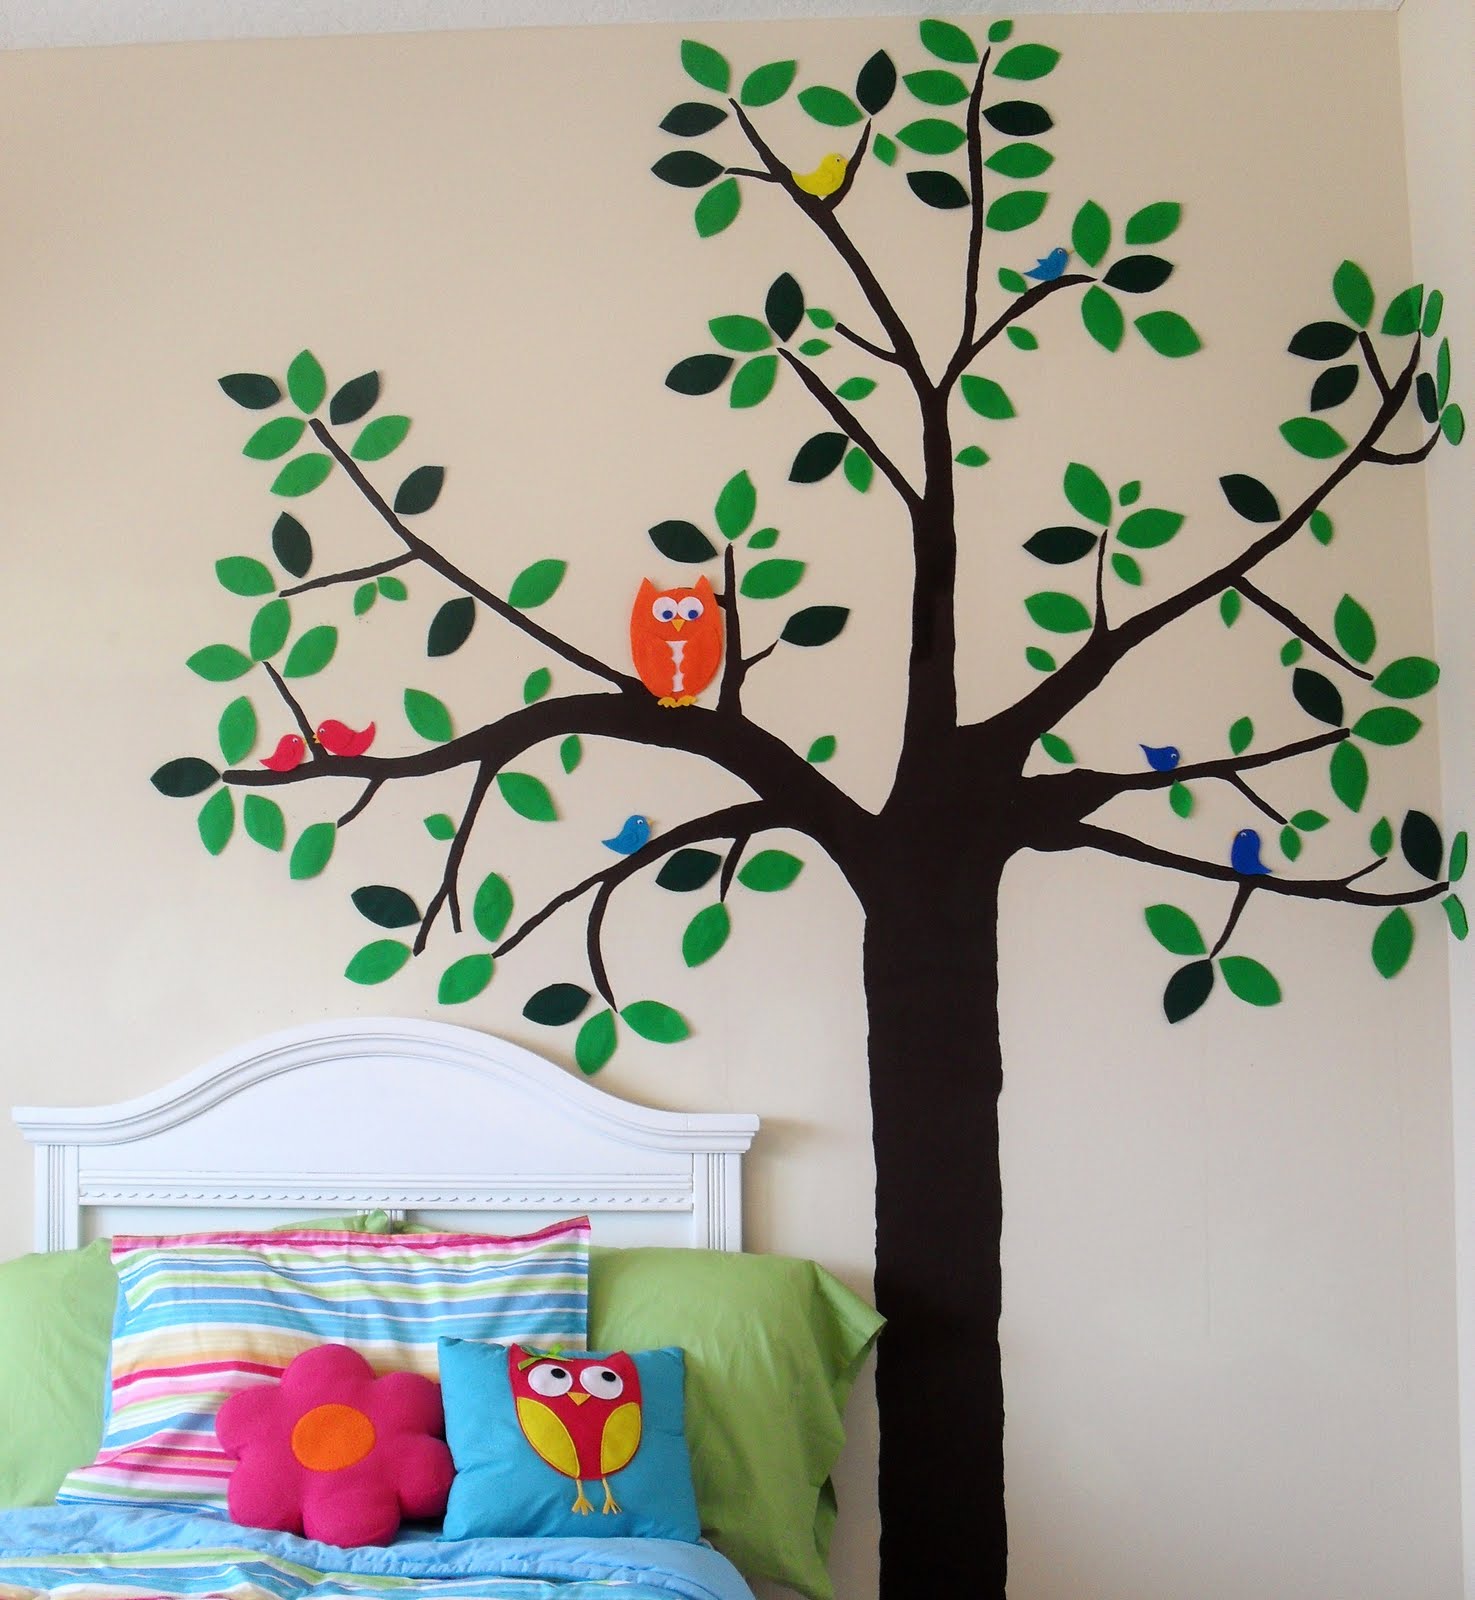 Sew Can Do: CraftShare Featured Guest: DIY Wall Decals